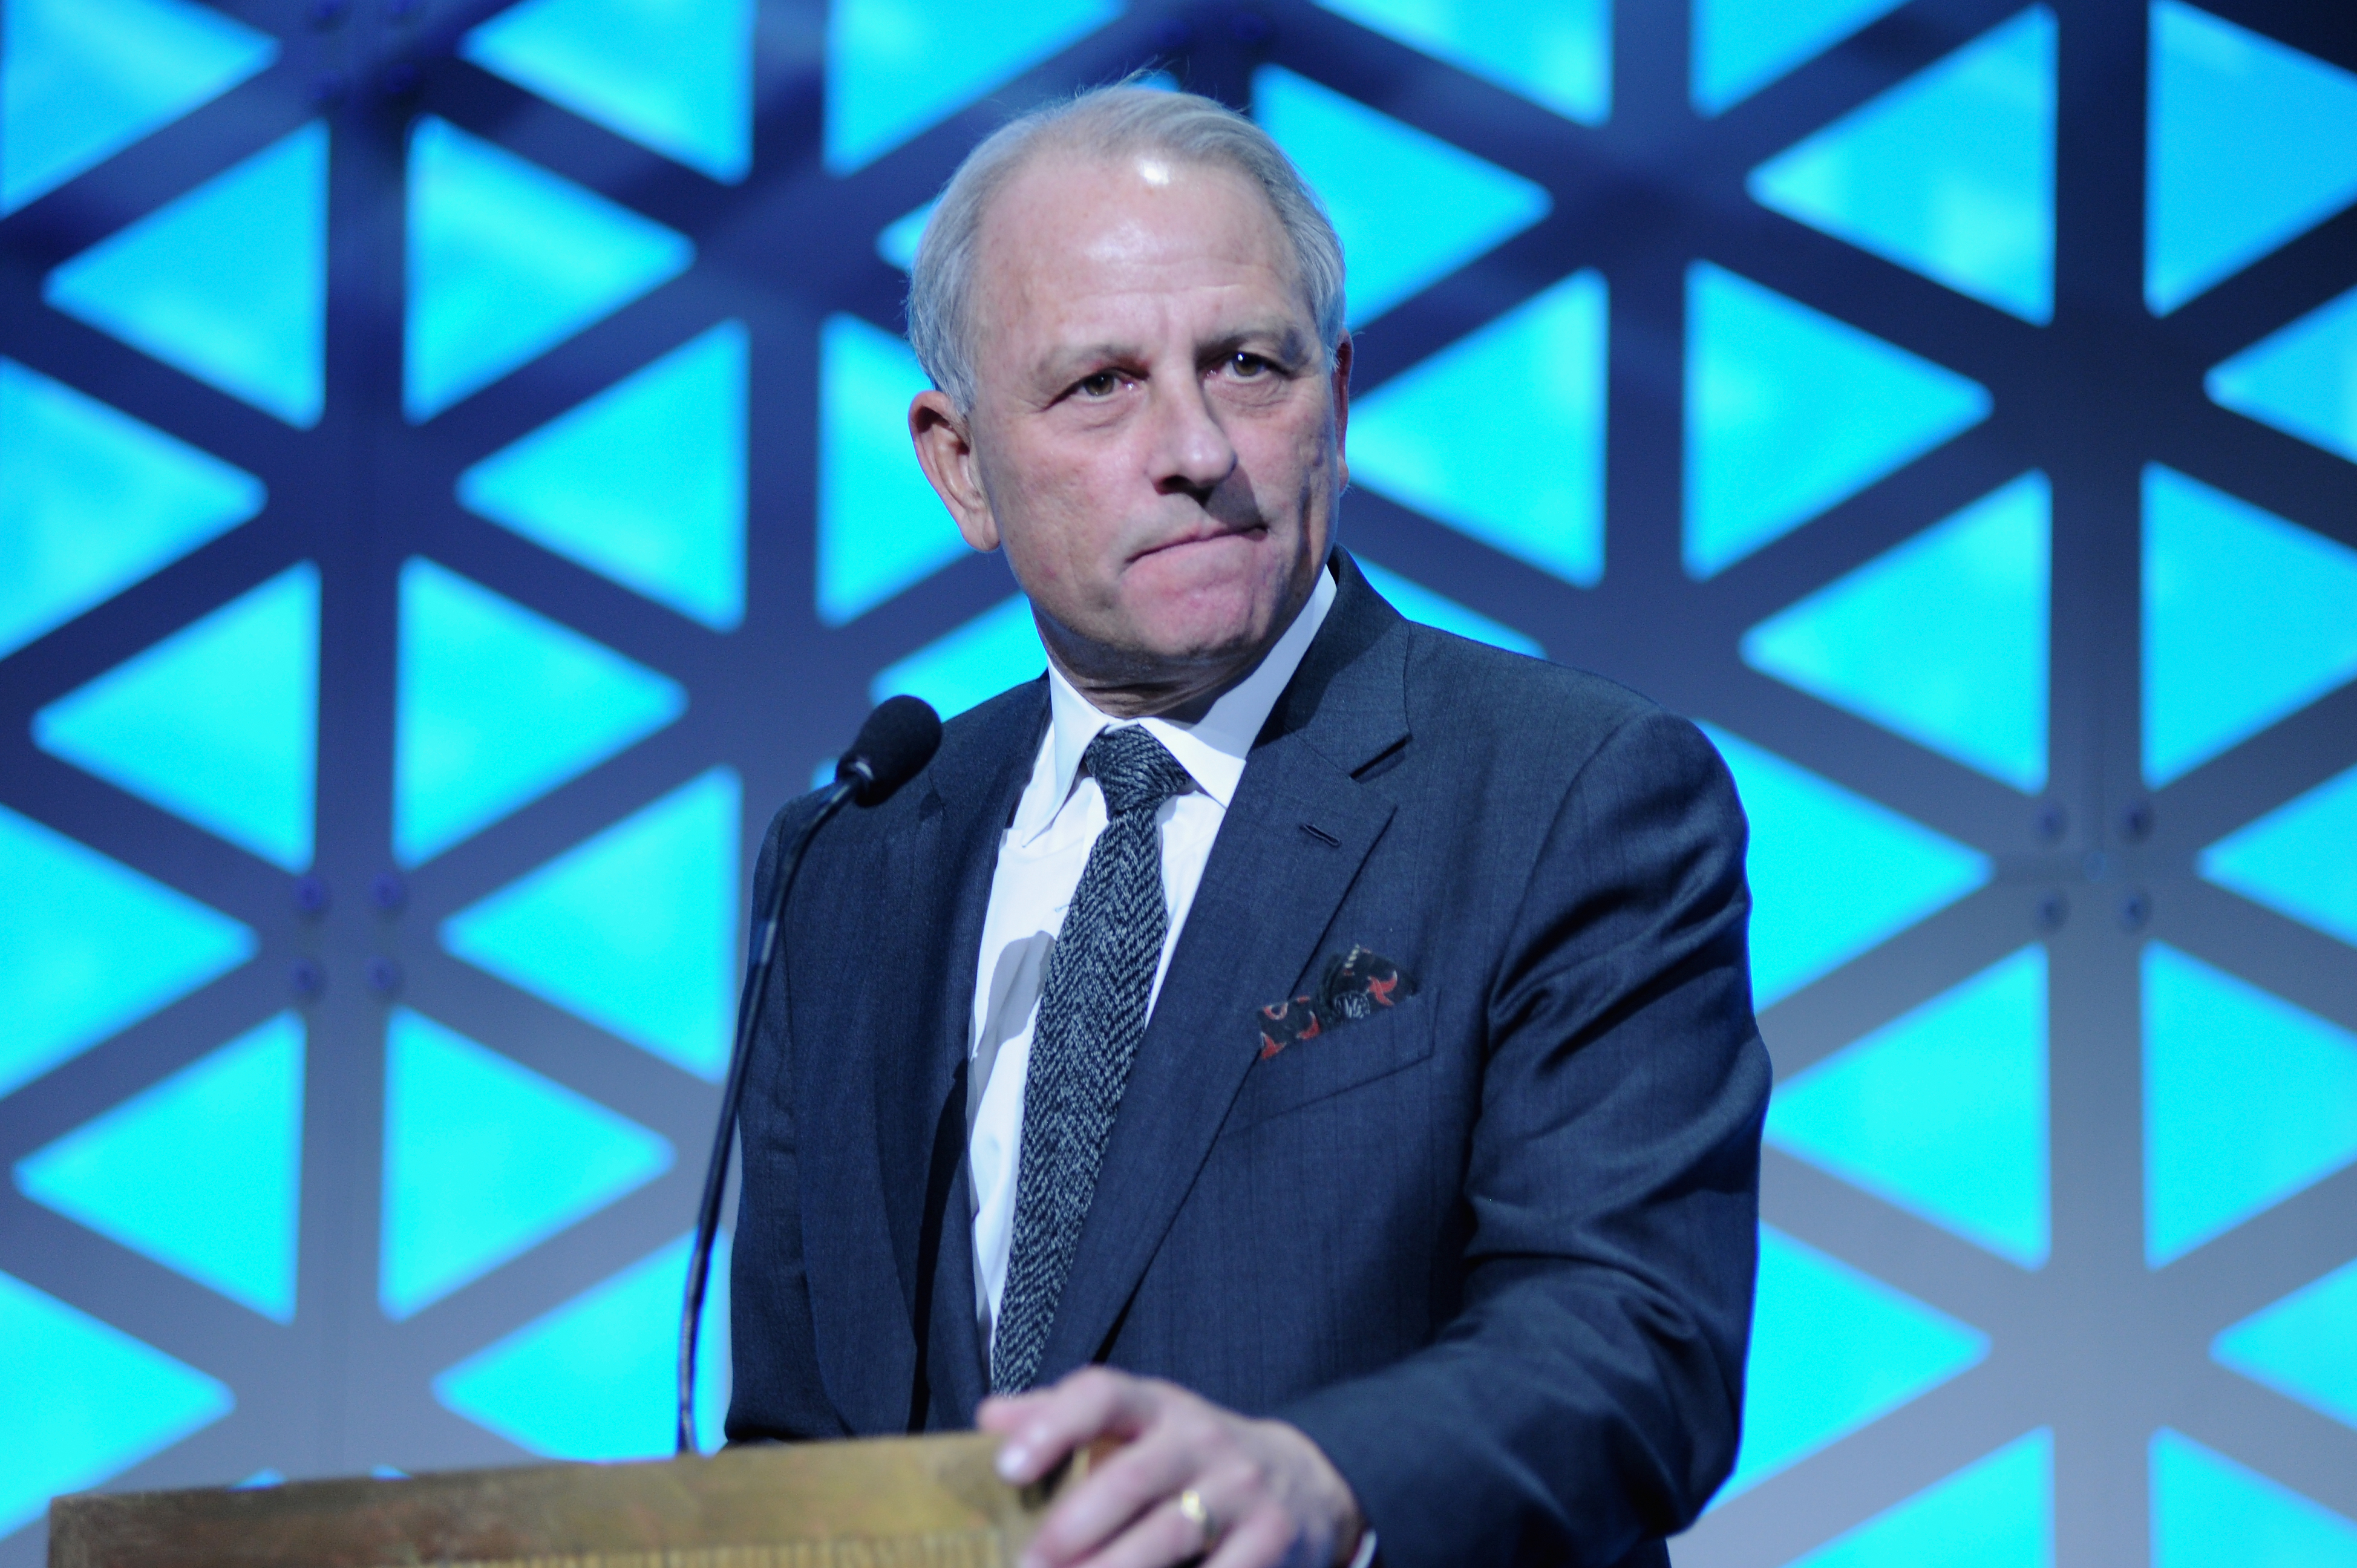 60 Minutes Executive Producer Jeff Fager accepts the Institutional Award on stage during The 77th Annual Peabody Awards Ceremony at Cipriani Wall Street on May 19, 2018 in New York City. (Photo by Brad Barket/Getty Images for Peabody) (Brad Barket&mdash;Getty Images for Peabody)